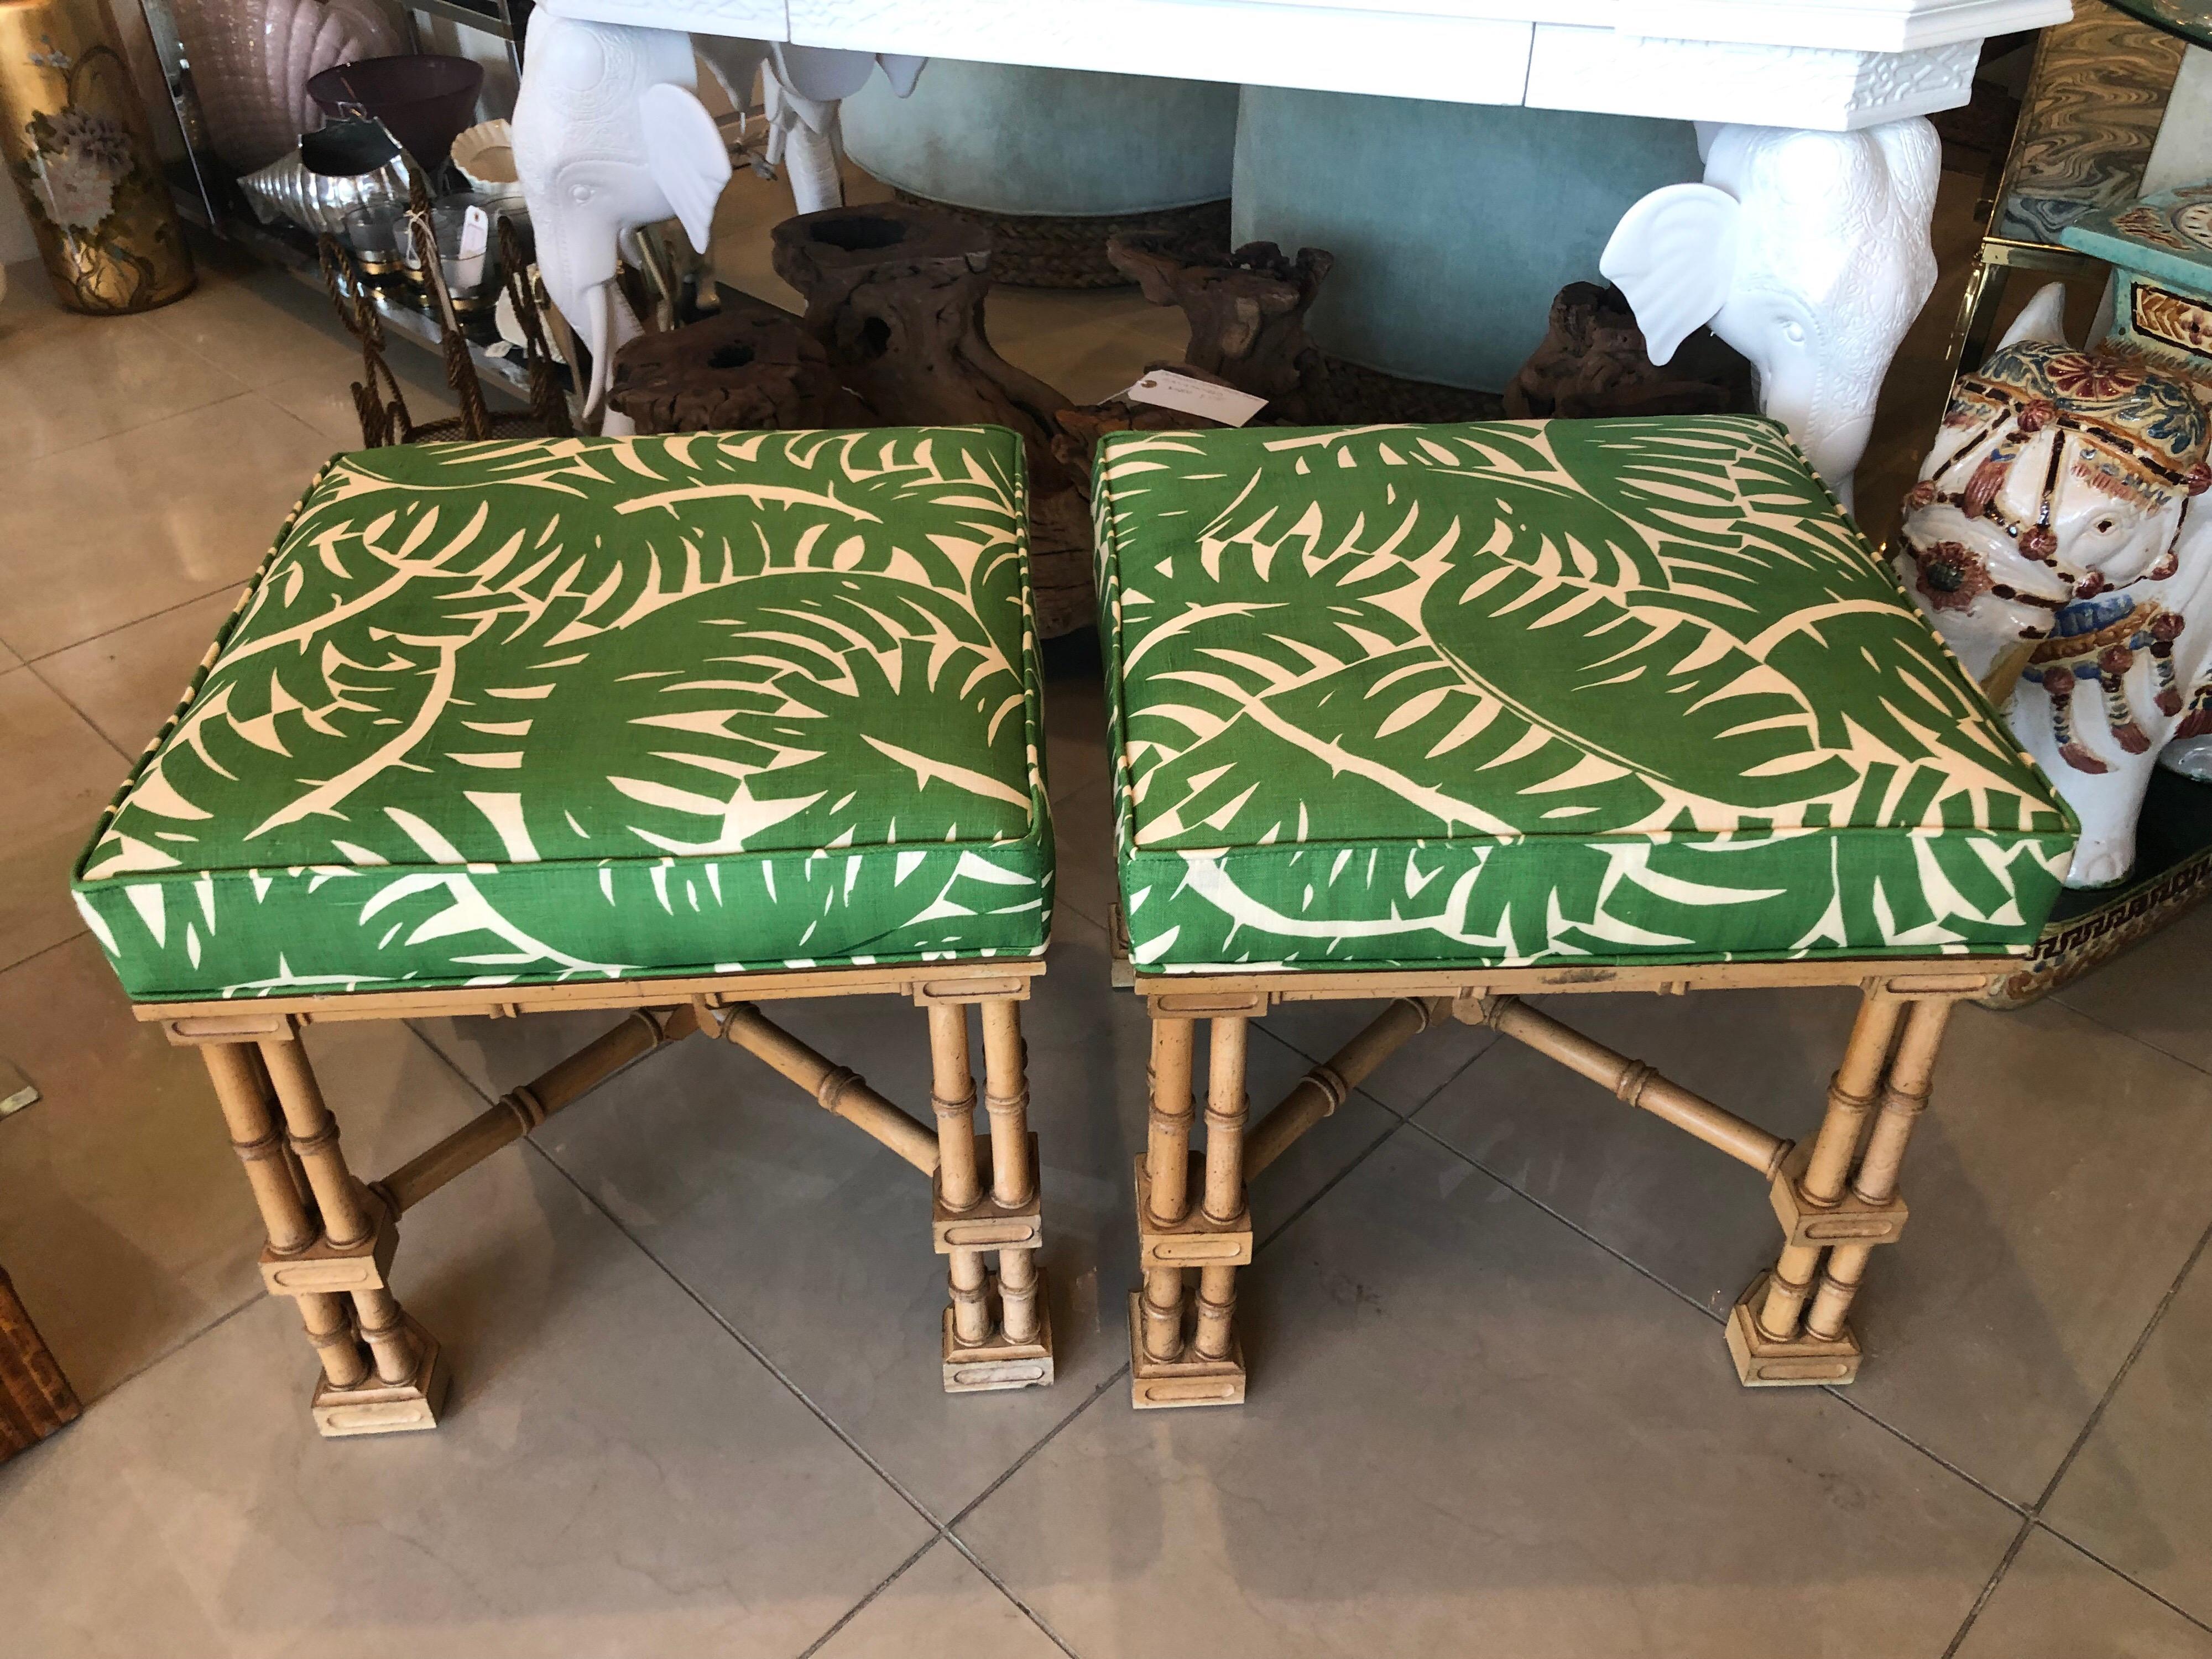 Lovely pair of vintage faux bamboo Ottomans, benches, stools. Newly upholstered in a lovely vintage palm leaf print. All new foam and upholstery. Original wood finish.